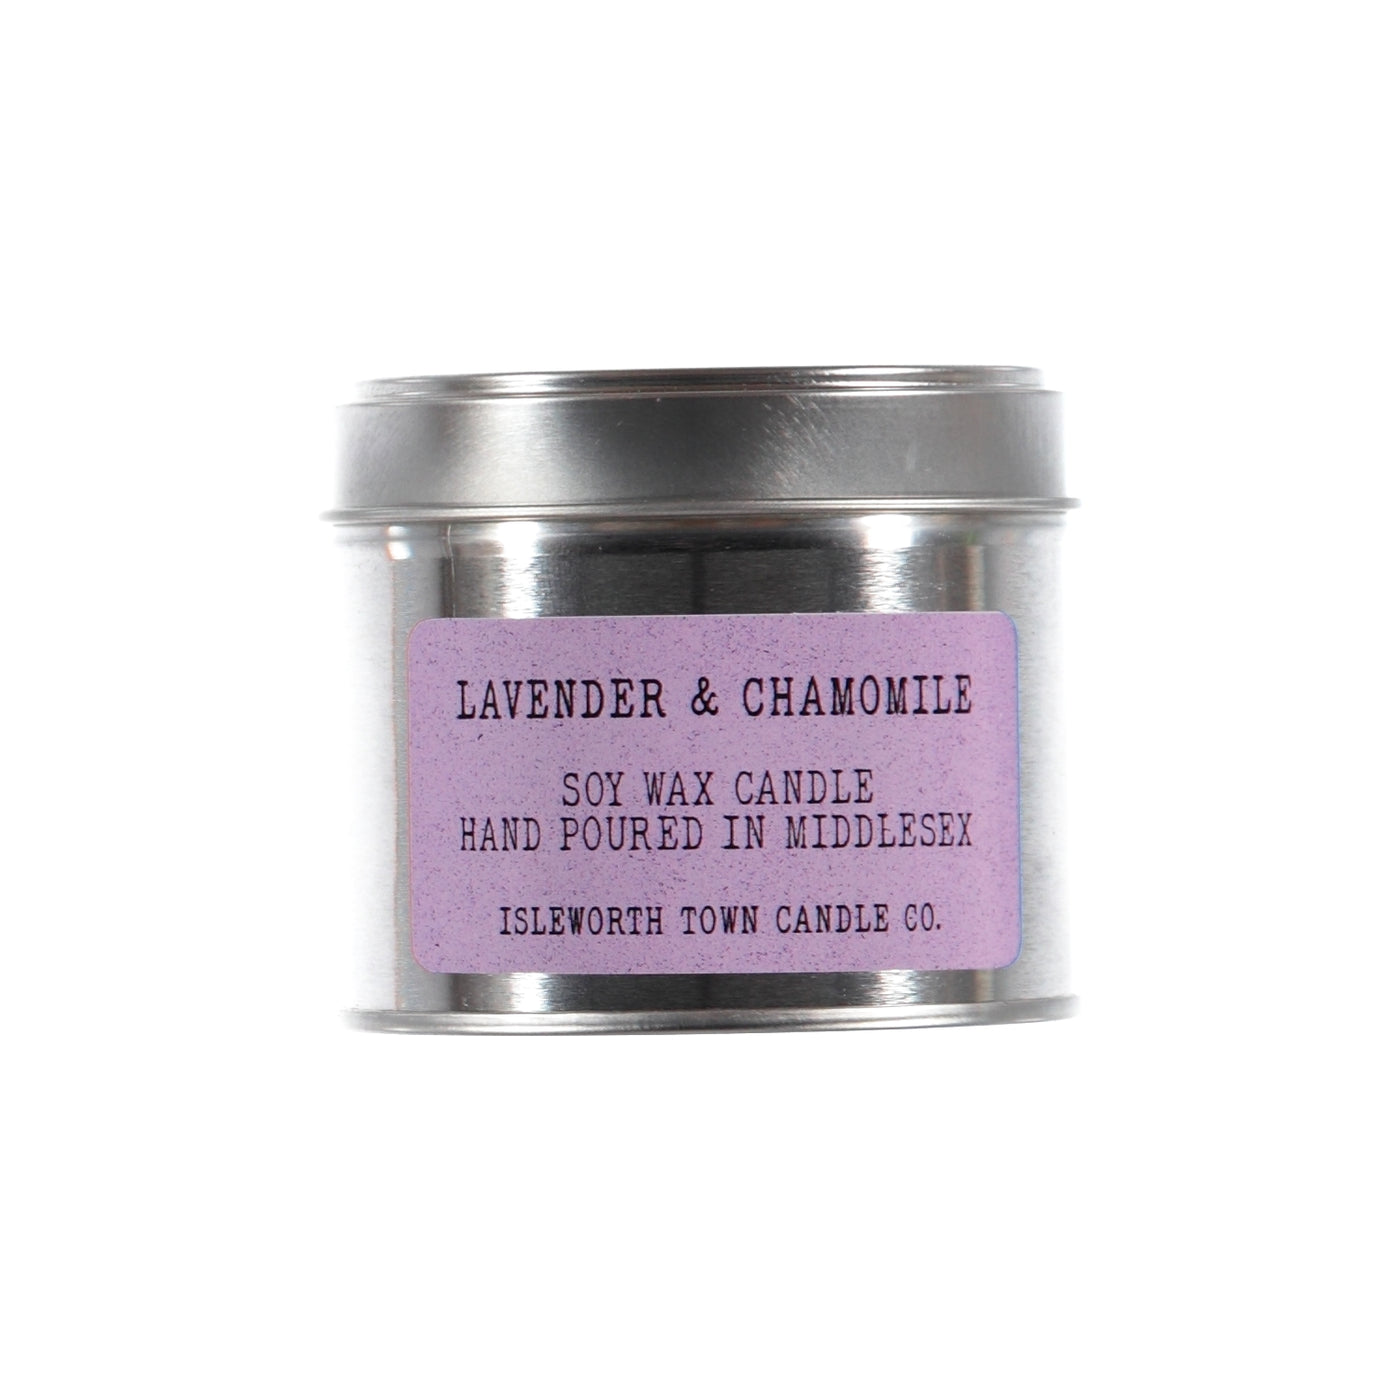 Isleworth Town Candle Co - Tin Candle - 220g - Lavender & Chamomile - stylecreep.com